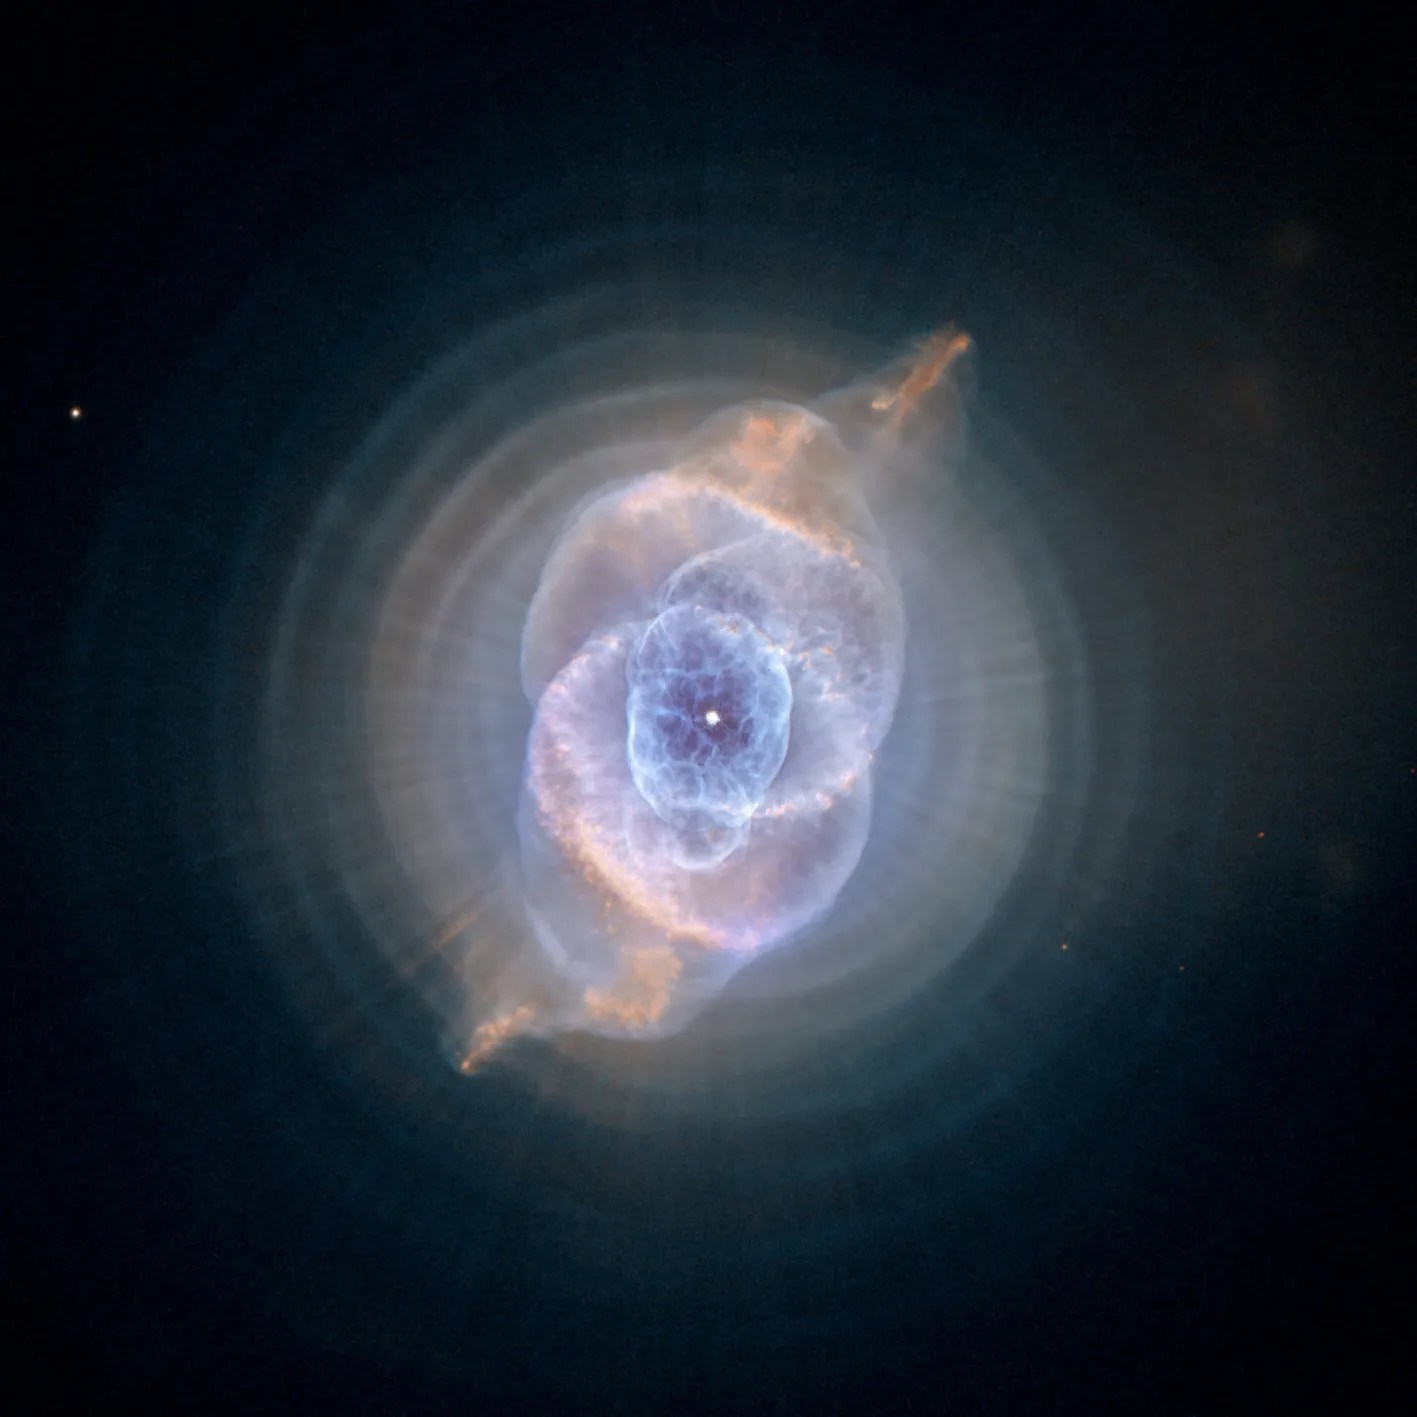 Large clouds of white dust and gas surrounding a bright white star in the center.